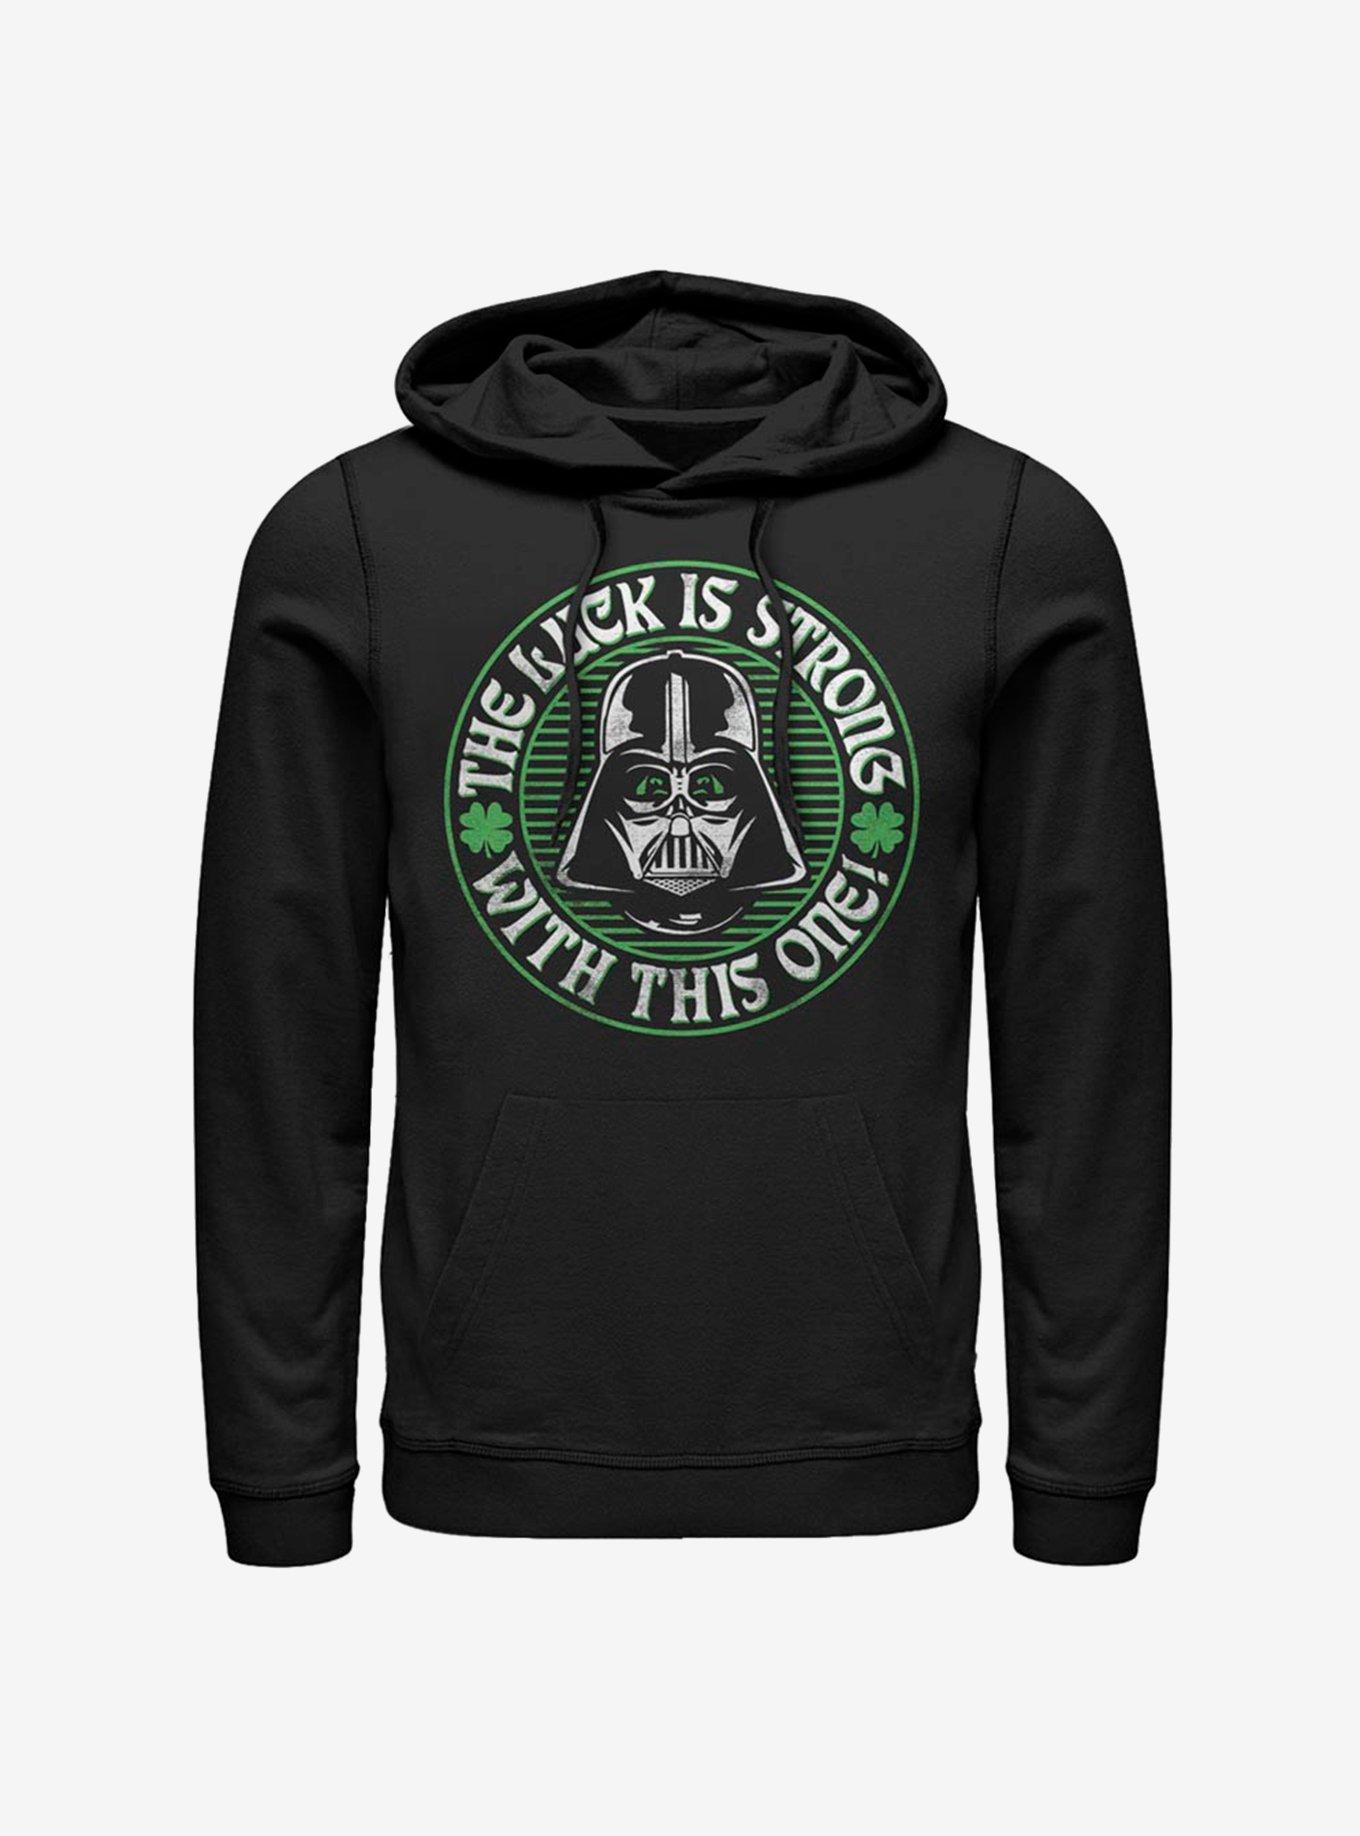 Star Wars Luck Is Strong Hoodie